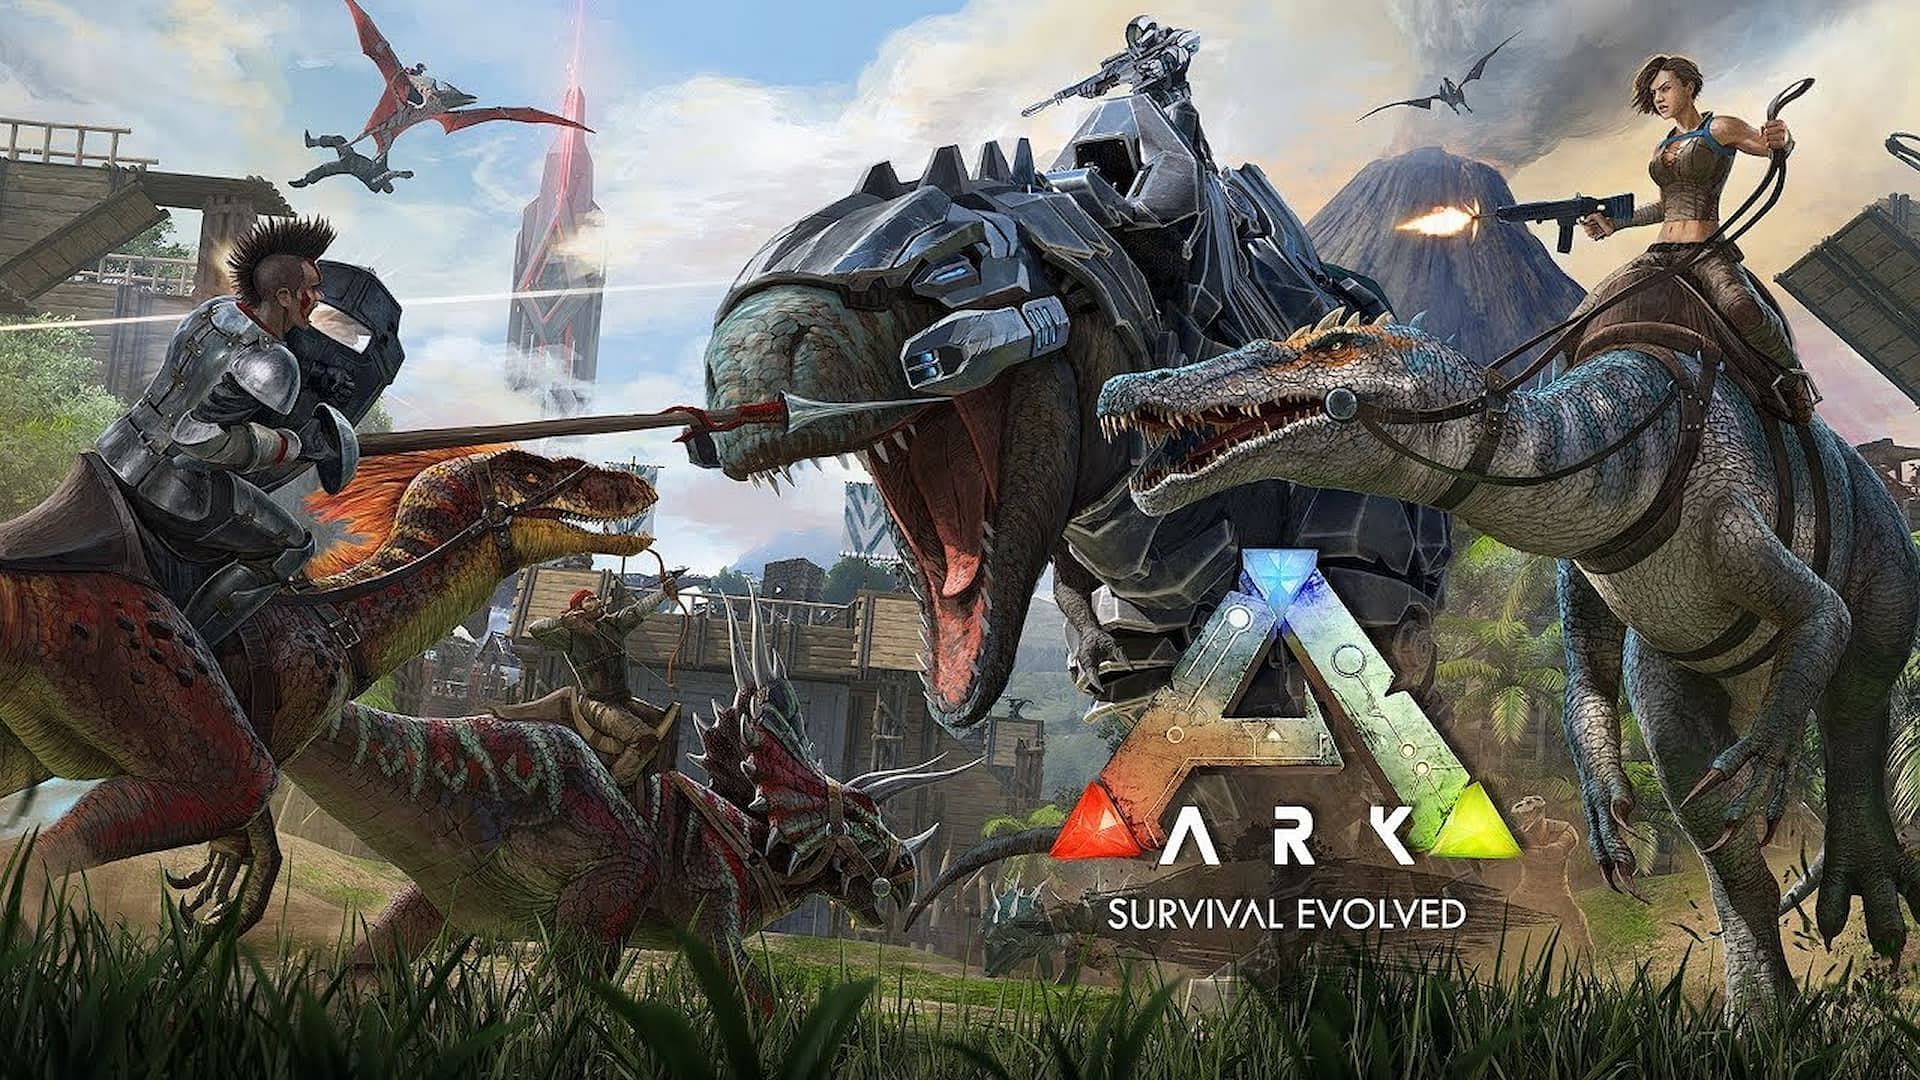 ARK: Survival Evolved might receive an Unreal Engine 5 upgrade (Image via Wildcard Studios)